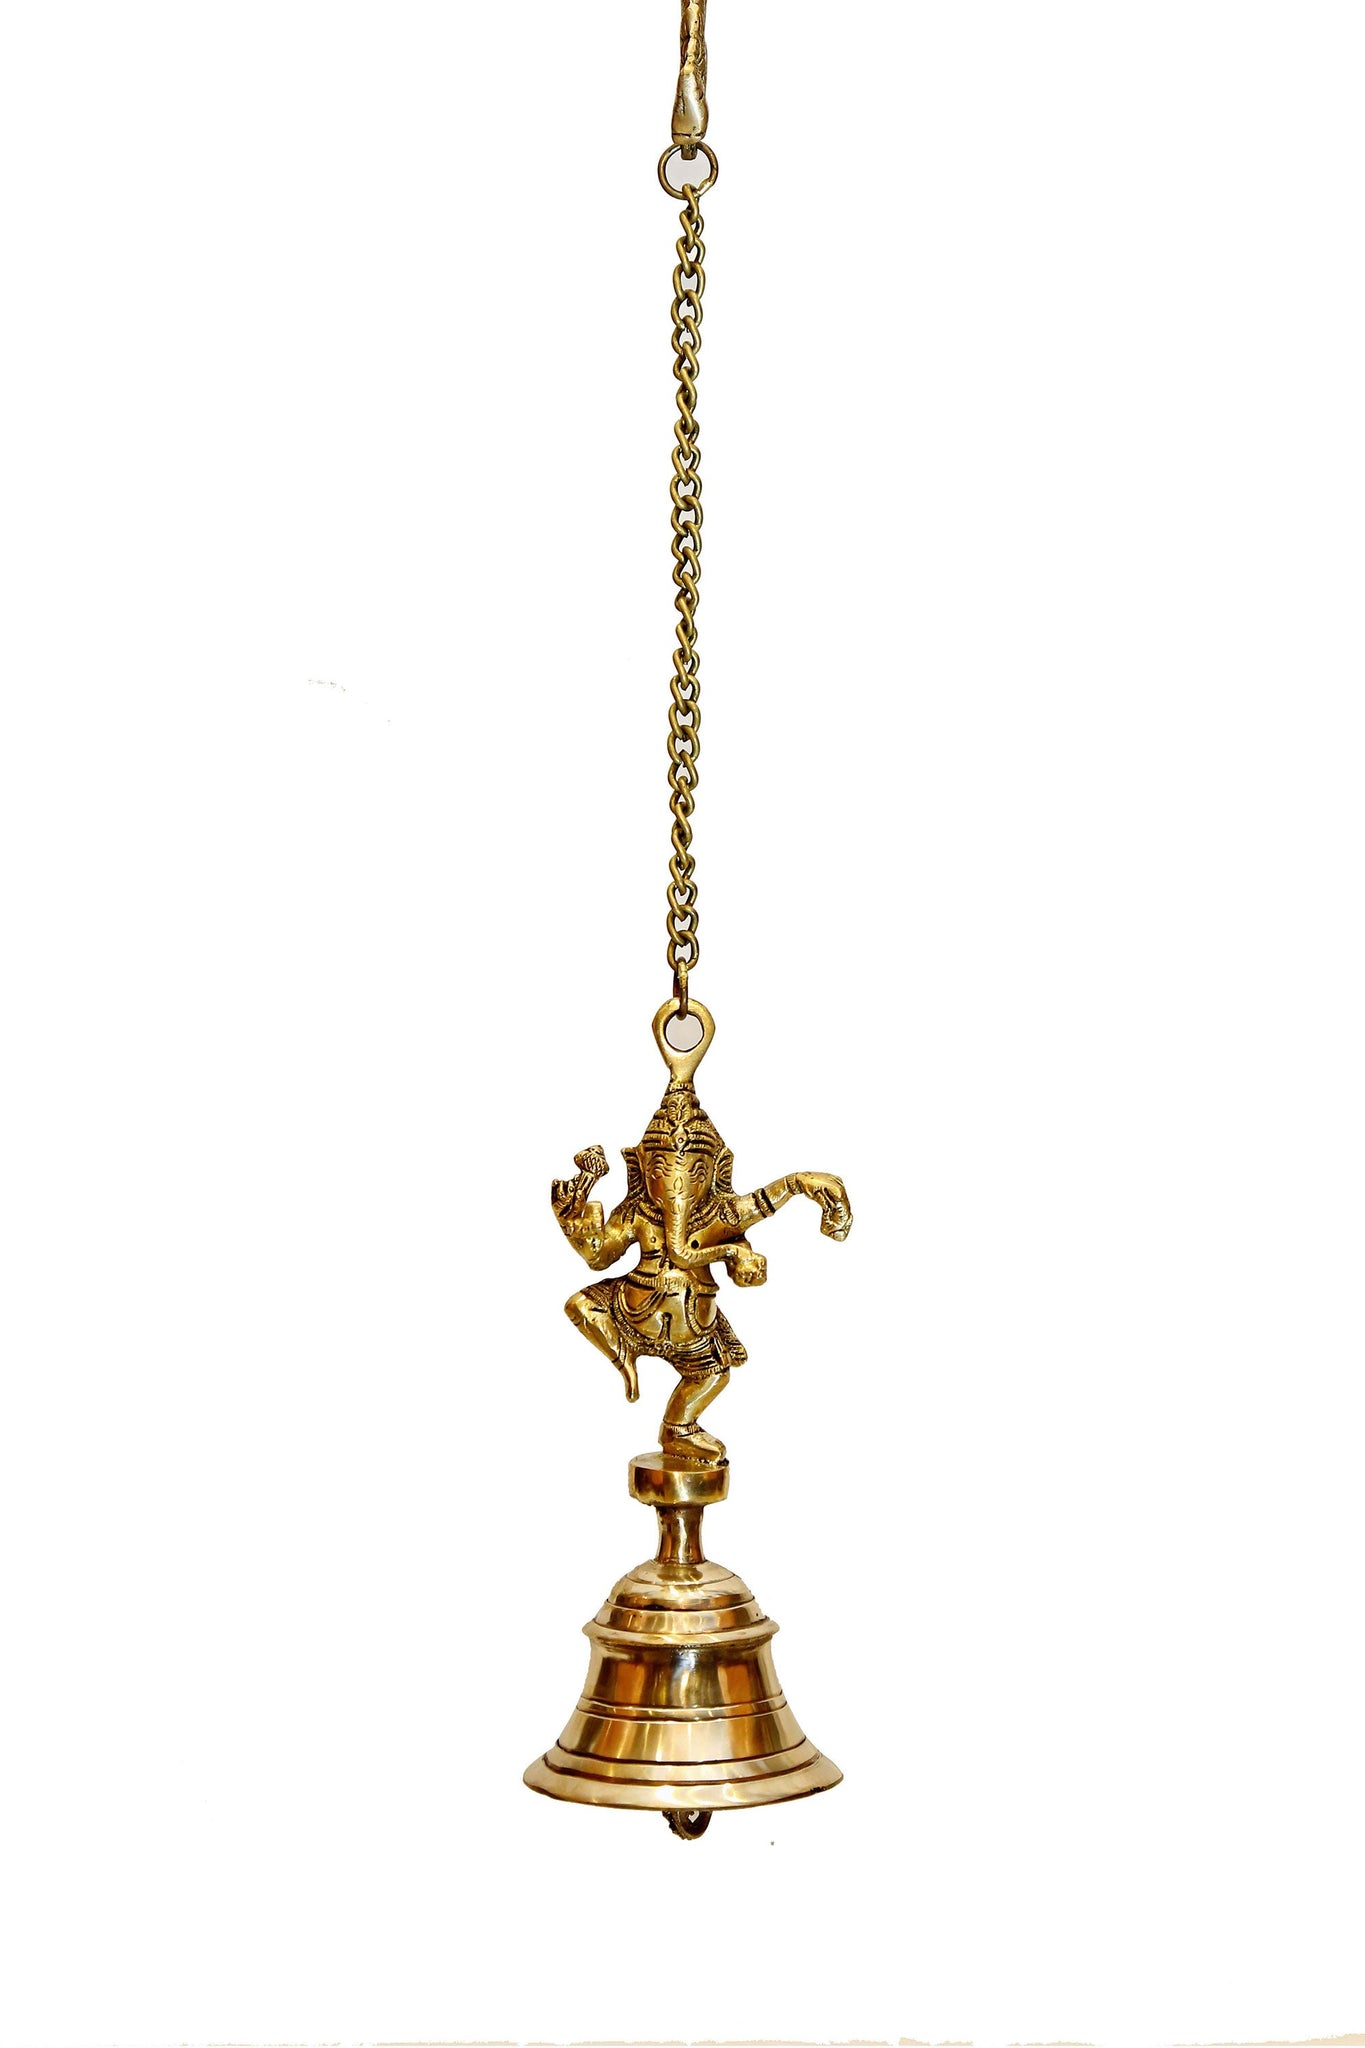 Brass Ganesha Statue with Temple Bells and Chain